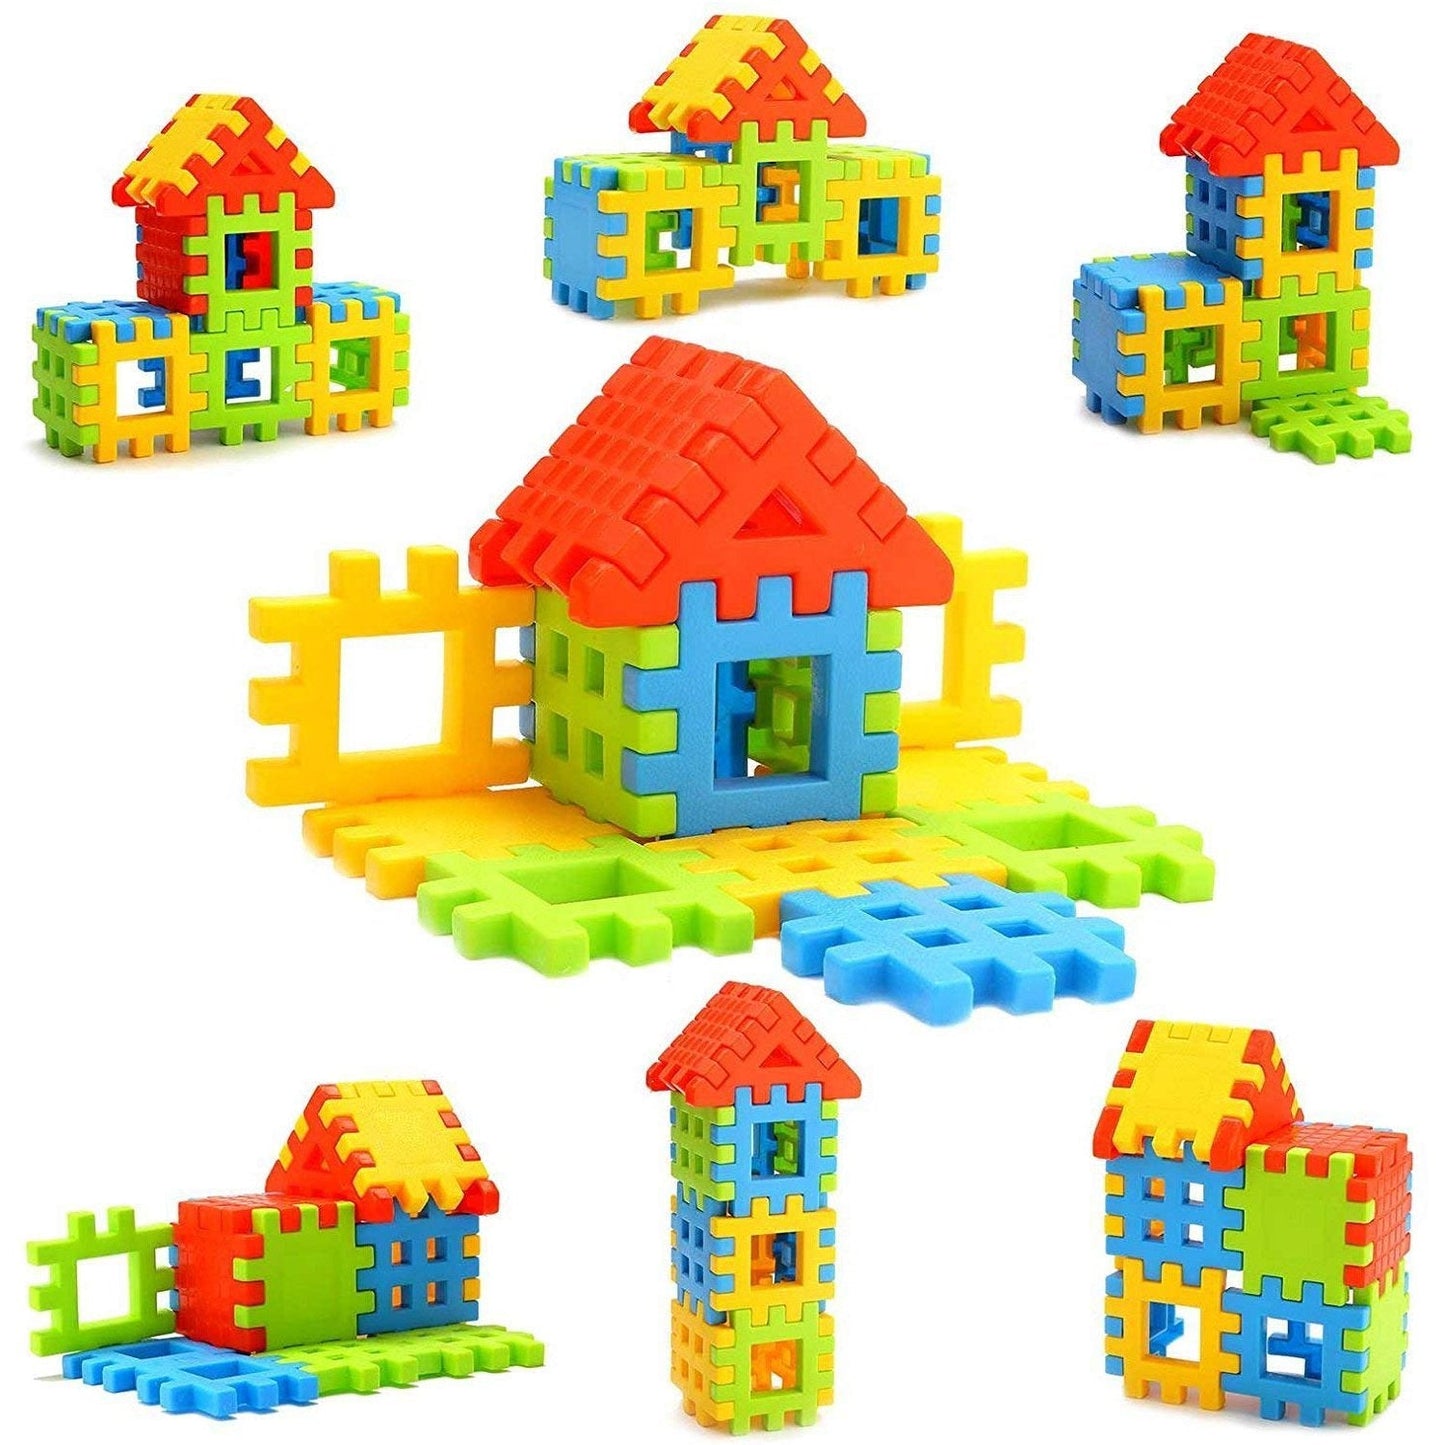 3911 200 Pc House Blocks Toy used in all kinds of household and official places specially for kids and children for their playing and enjoying purposes.